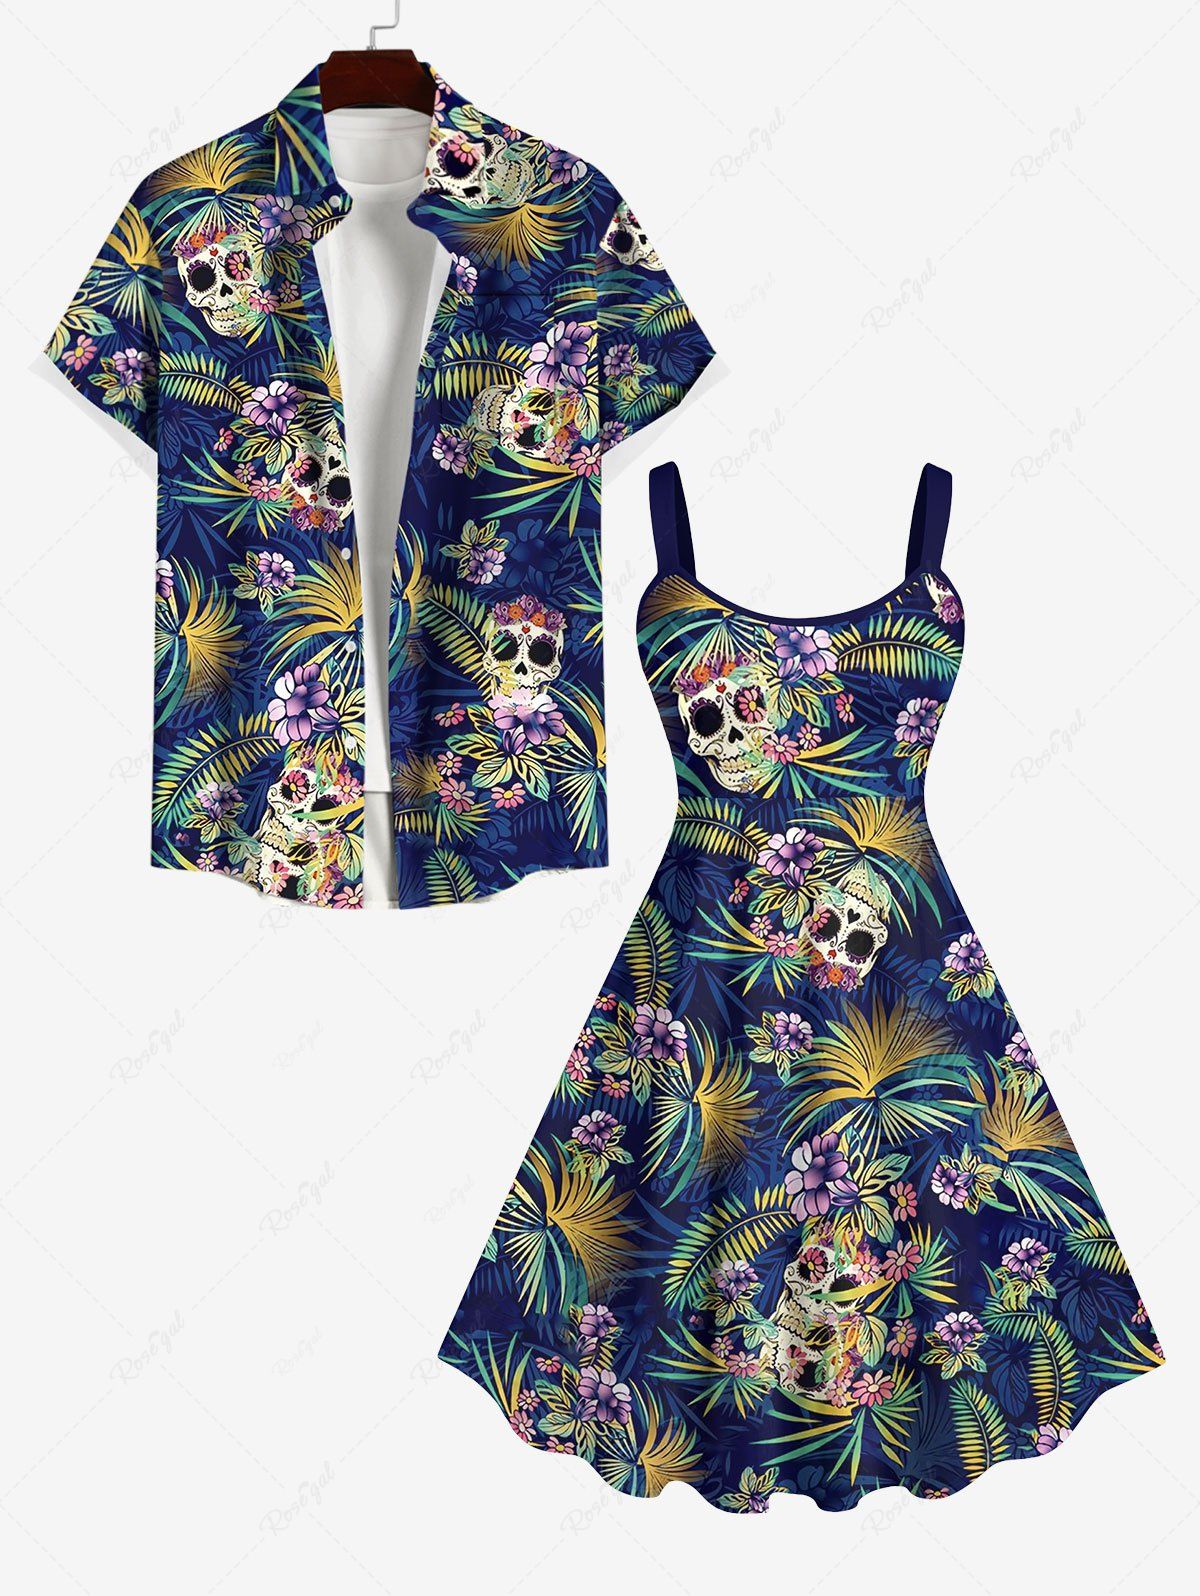 Sale Skulls Coconut Tree Leaf Flower Print Backless Dress and Button Shirt Plus Size Matching Hawaii Beach Outfit for Couples  